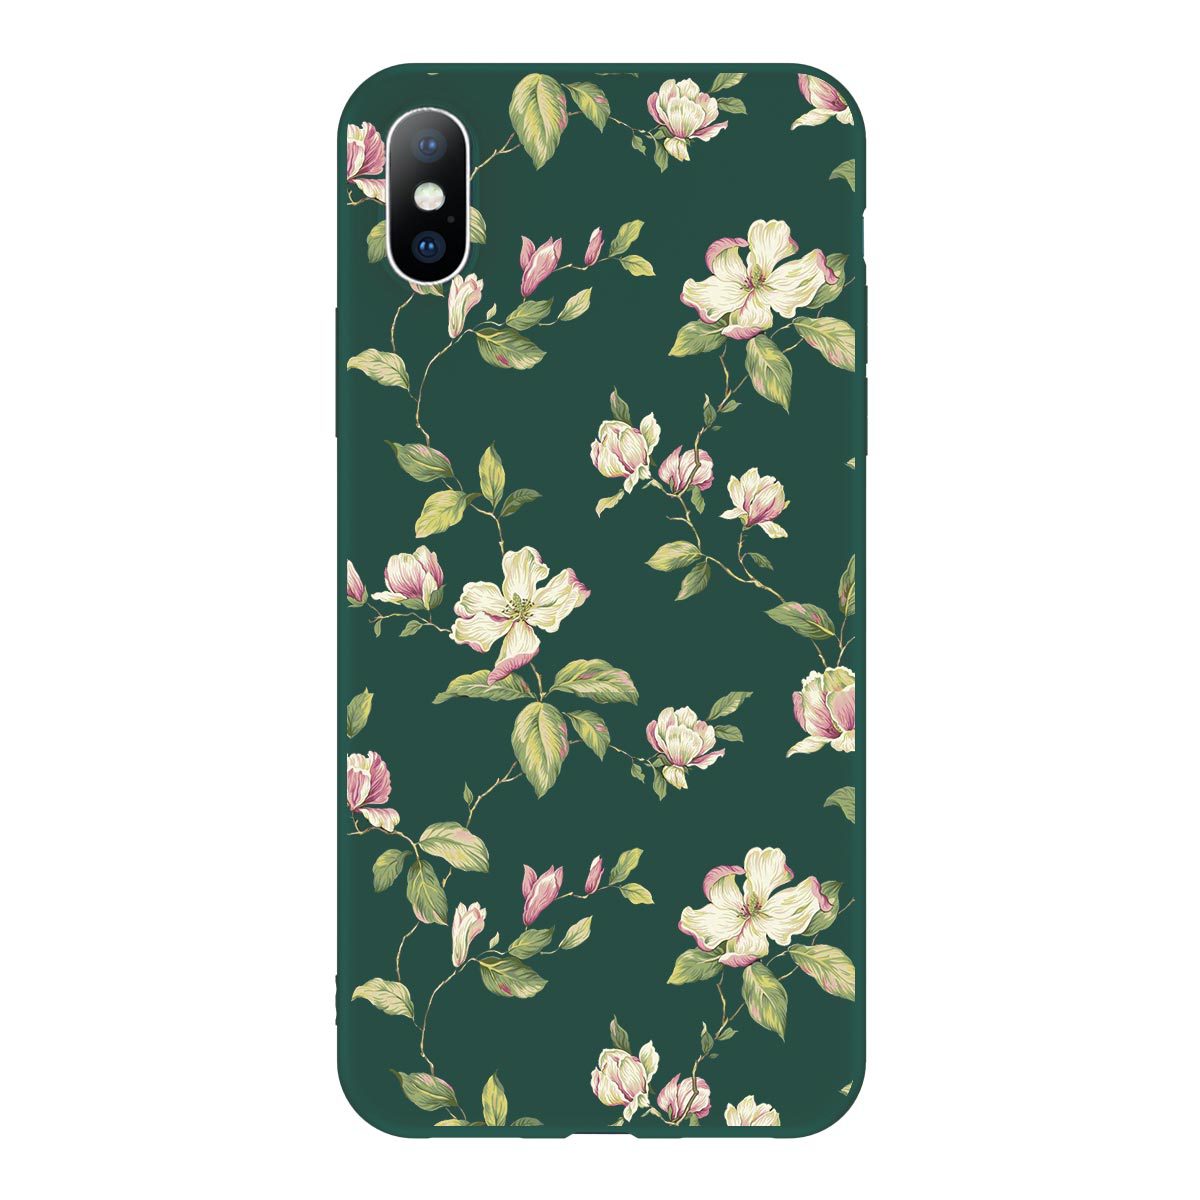 TPU Chinese Style Painted Floral Mobile Phone Case Soft